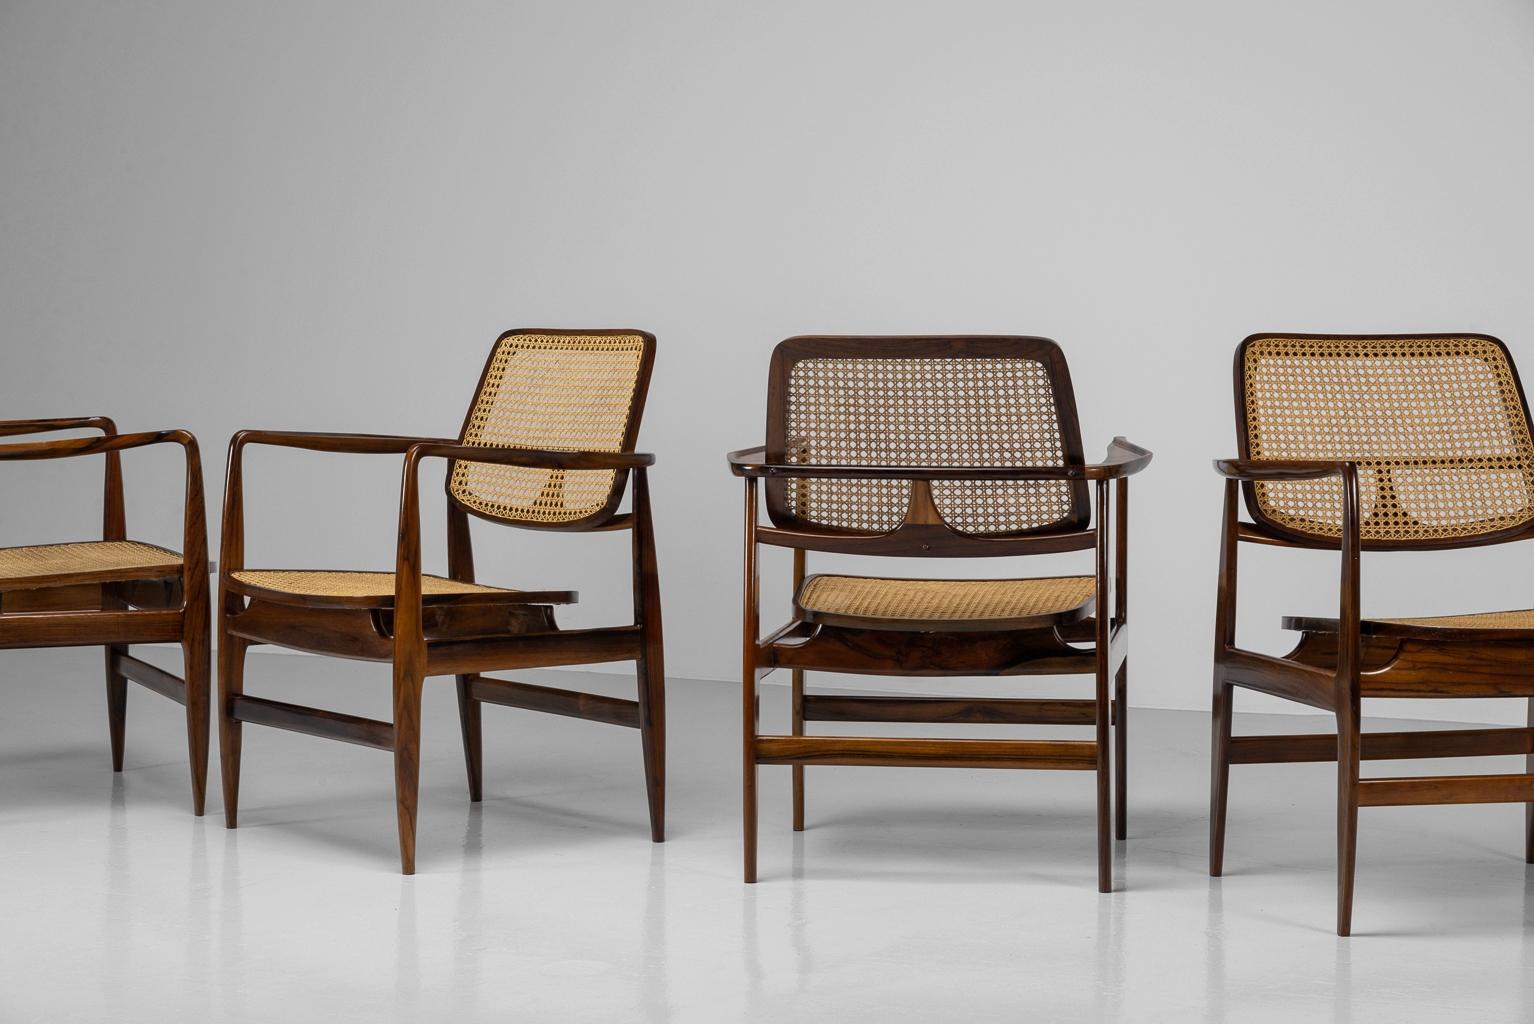 Extraordinary set of Oscar armchairs by Sergio Rodrigues manufactured by OCA in Brazil 1956. These chairs pay tribute to the renowned architect Oscar Niemeyer. Born from the Hauner Sofa, Sergio Rodrigues' first furniture creation in 1954, the Oscar